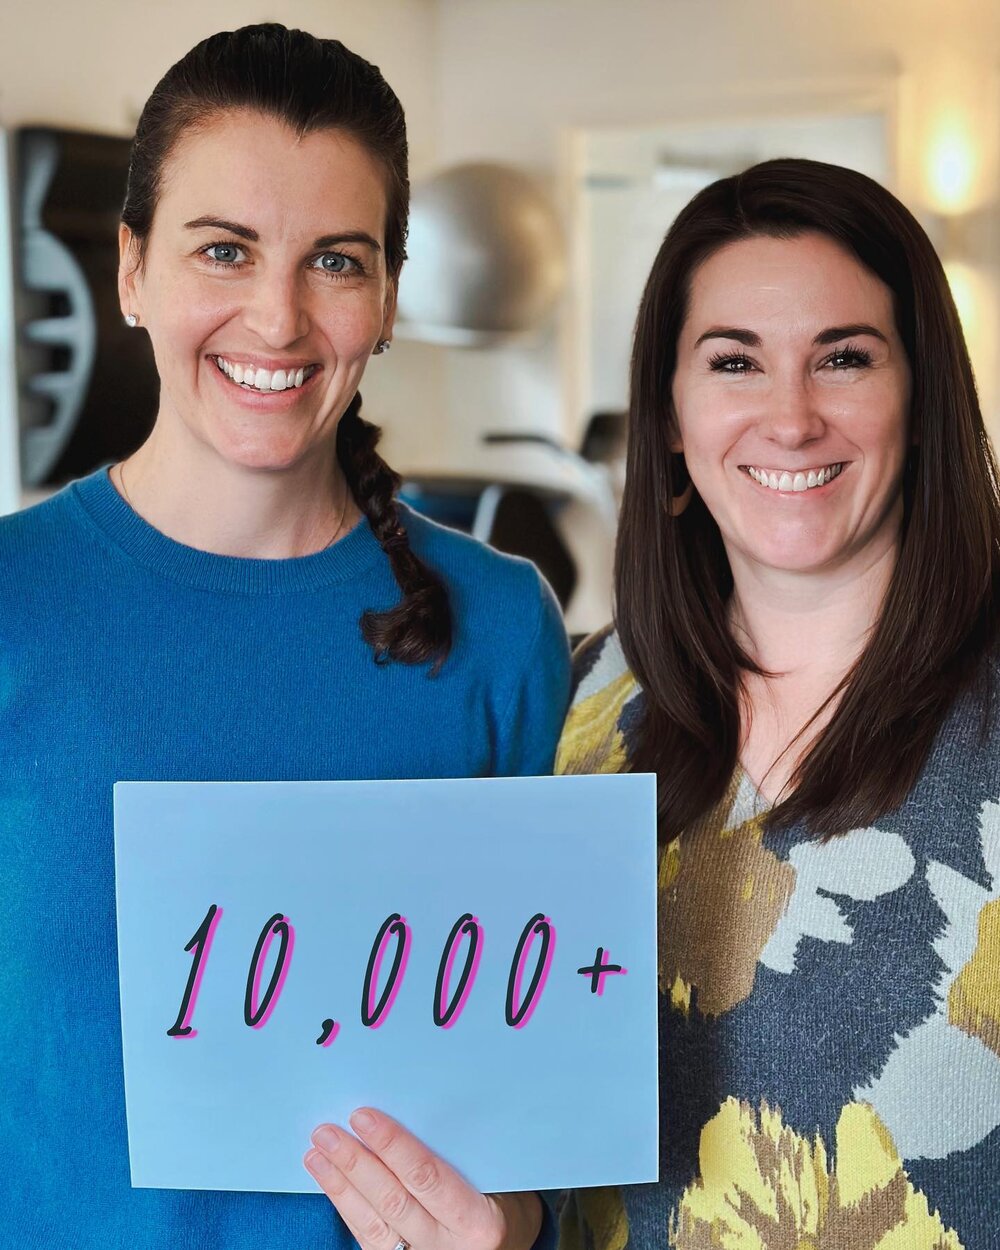 Wow, 3 years and 1 pandemic pause later and we have now helped patients for 10,000 total hours! 🤯 

Thank you to our patients, partners, friends, and family that spread the word so we can serve even more people in need. 💙

We are proud to help you 